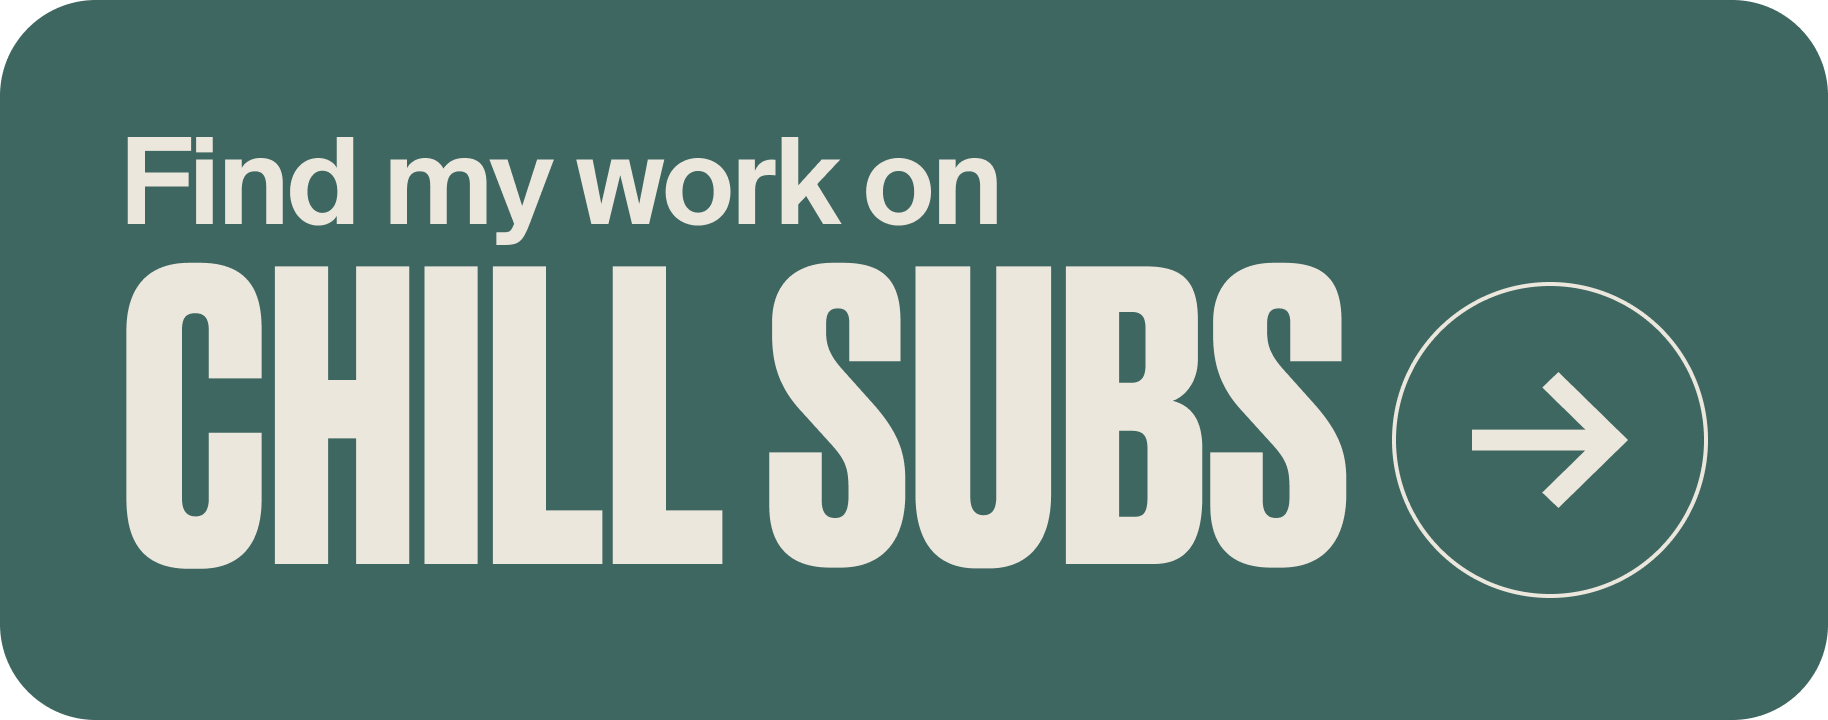 Sticker for writers who have a profile on Chill Subs. Beige text on green background saying "Find my work on Chill Subs".